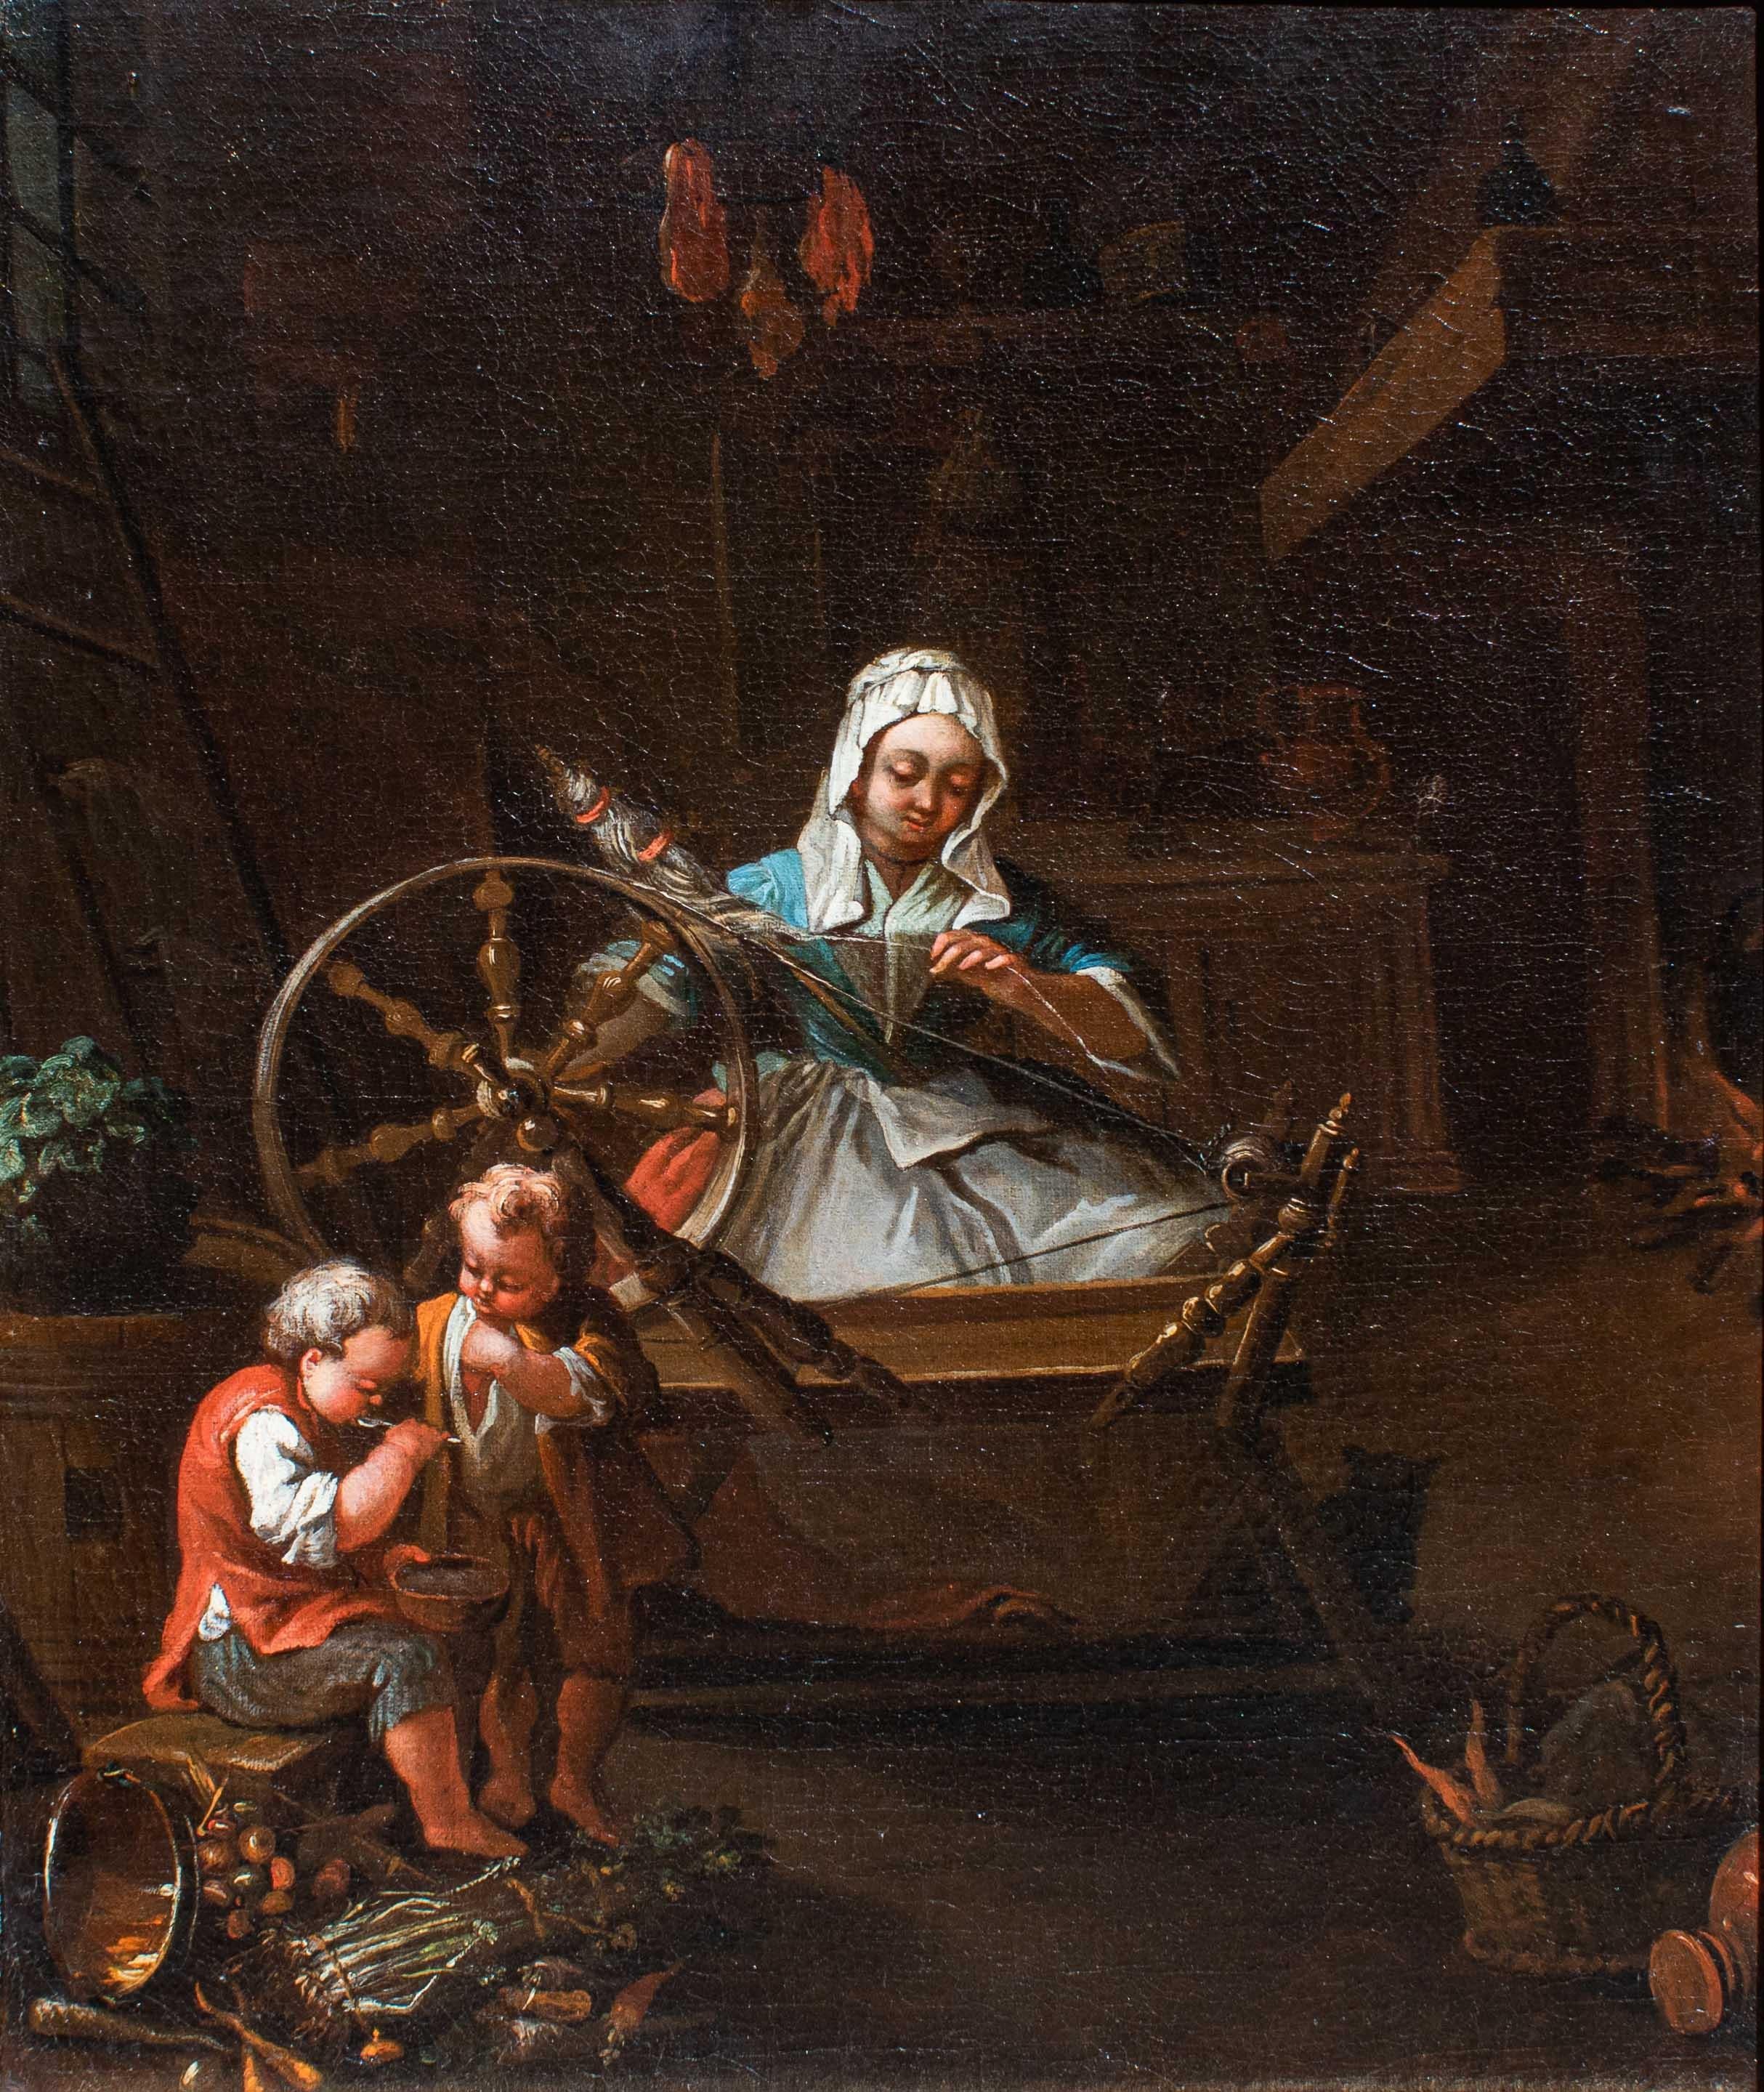 Flemish school, 18th century
Interior scene with spinner
Oil on canvas, 52.2 x 42.5 cm - with frame 60 x 50 x 4.5 cm

The typically Flemish frankness in restoring a scene of life hosannas, in this painting, the everyday life of the home. A woman